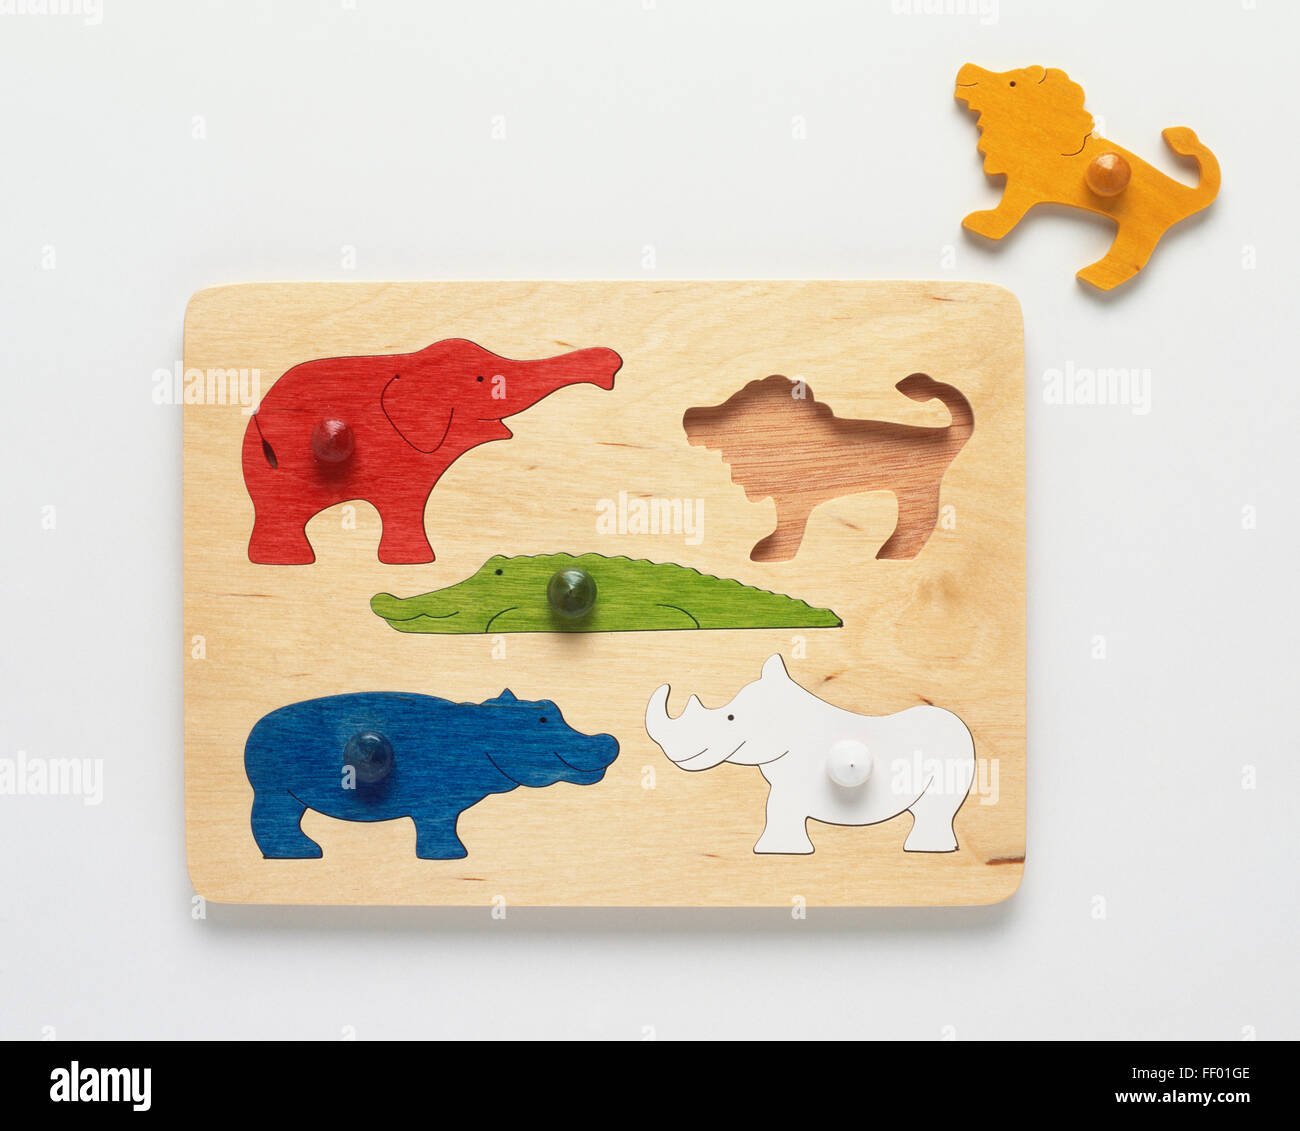 Aan animal puzzle for young children Stock Photo